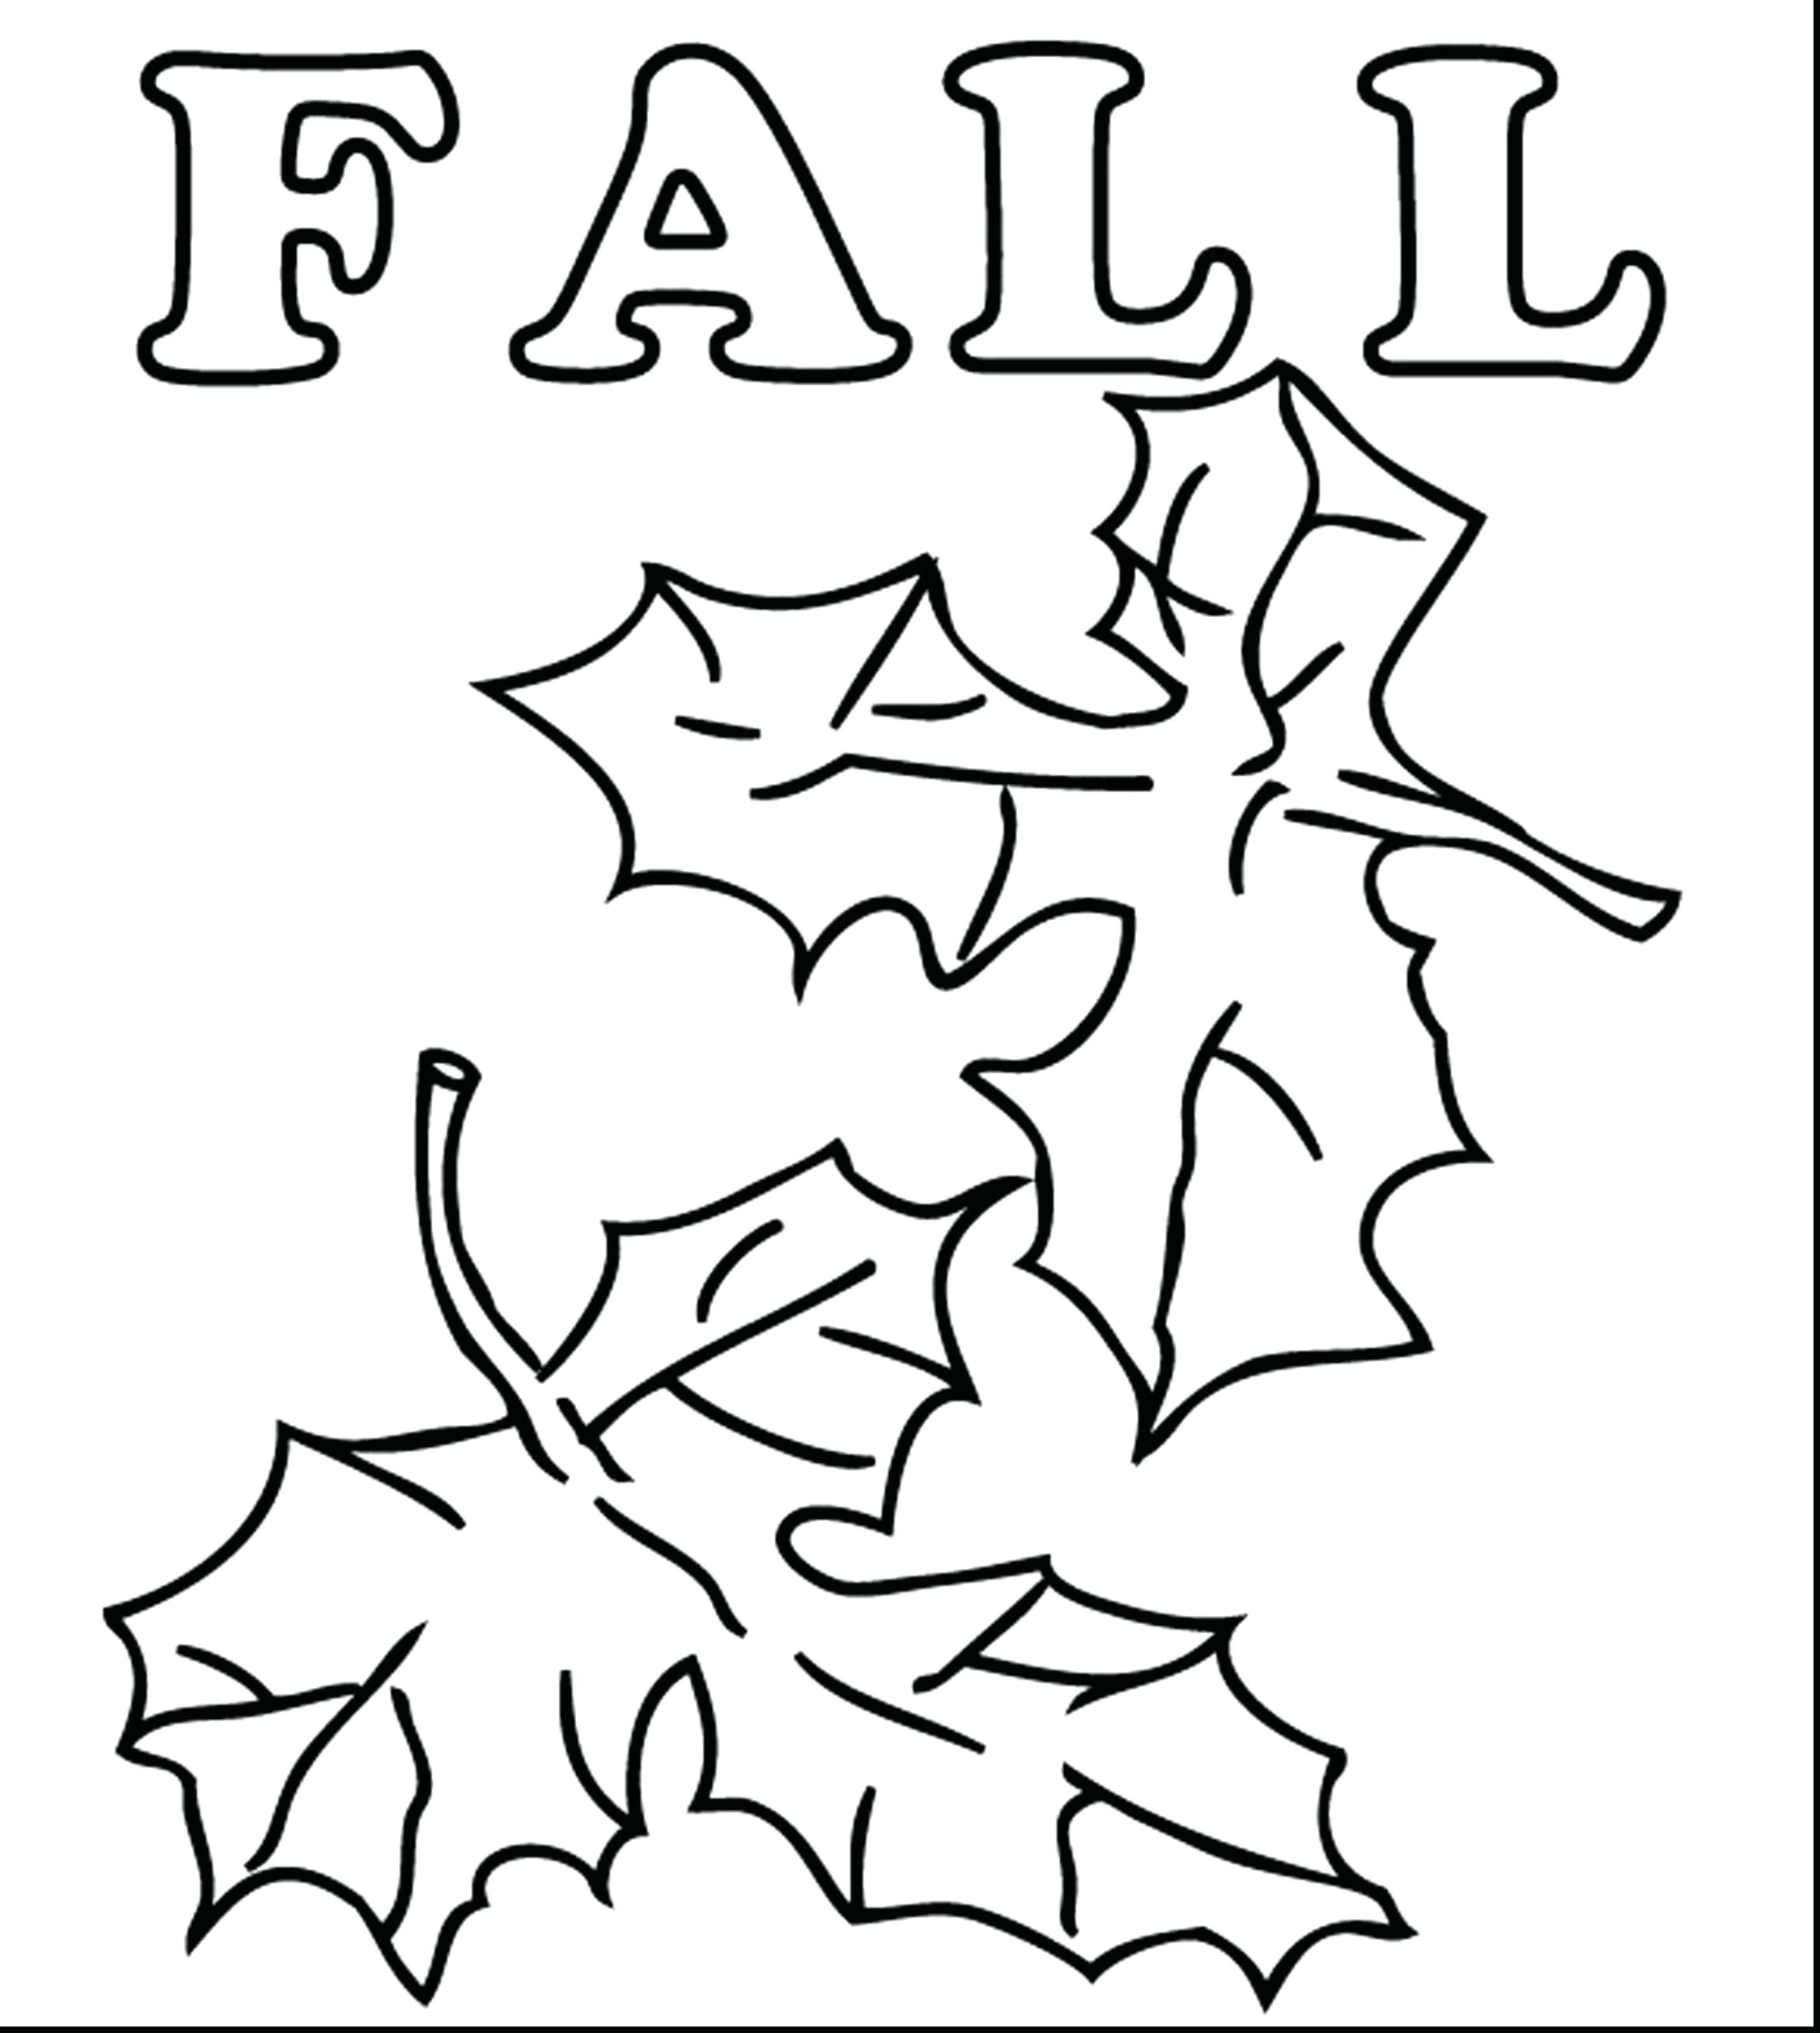 Fall Coloring Page Coloring Ideas Free Fall Coloring Pages Printable Autumn Sheets